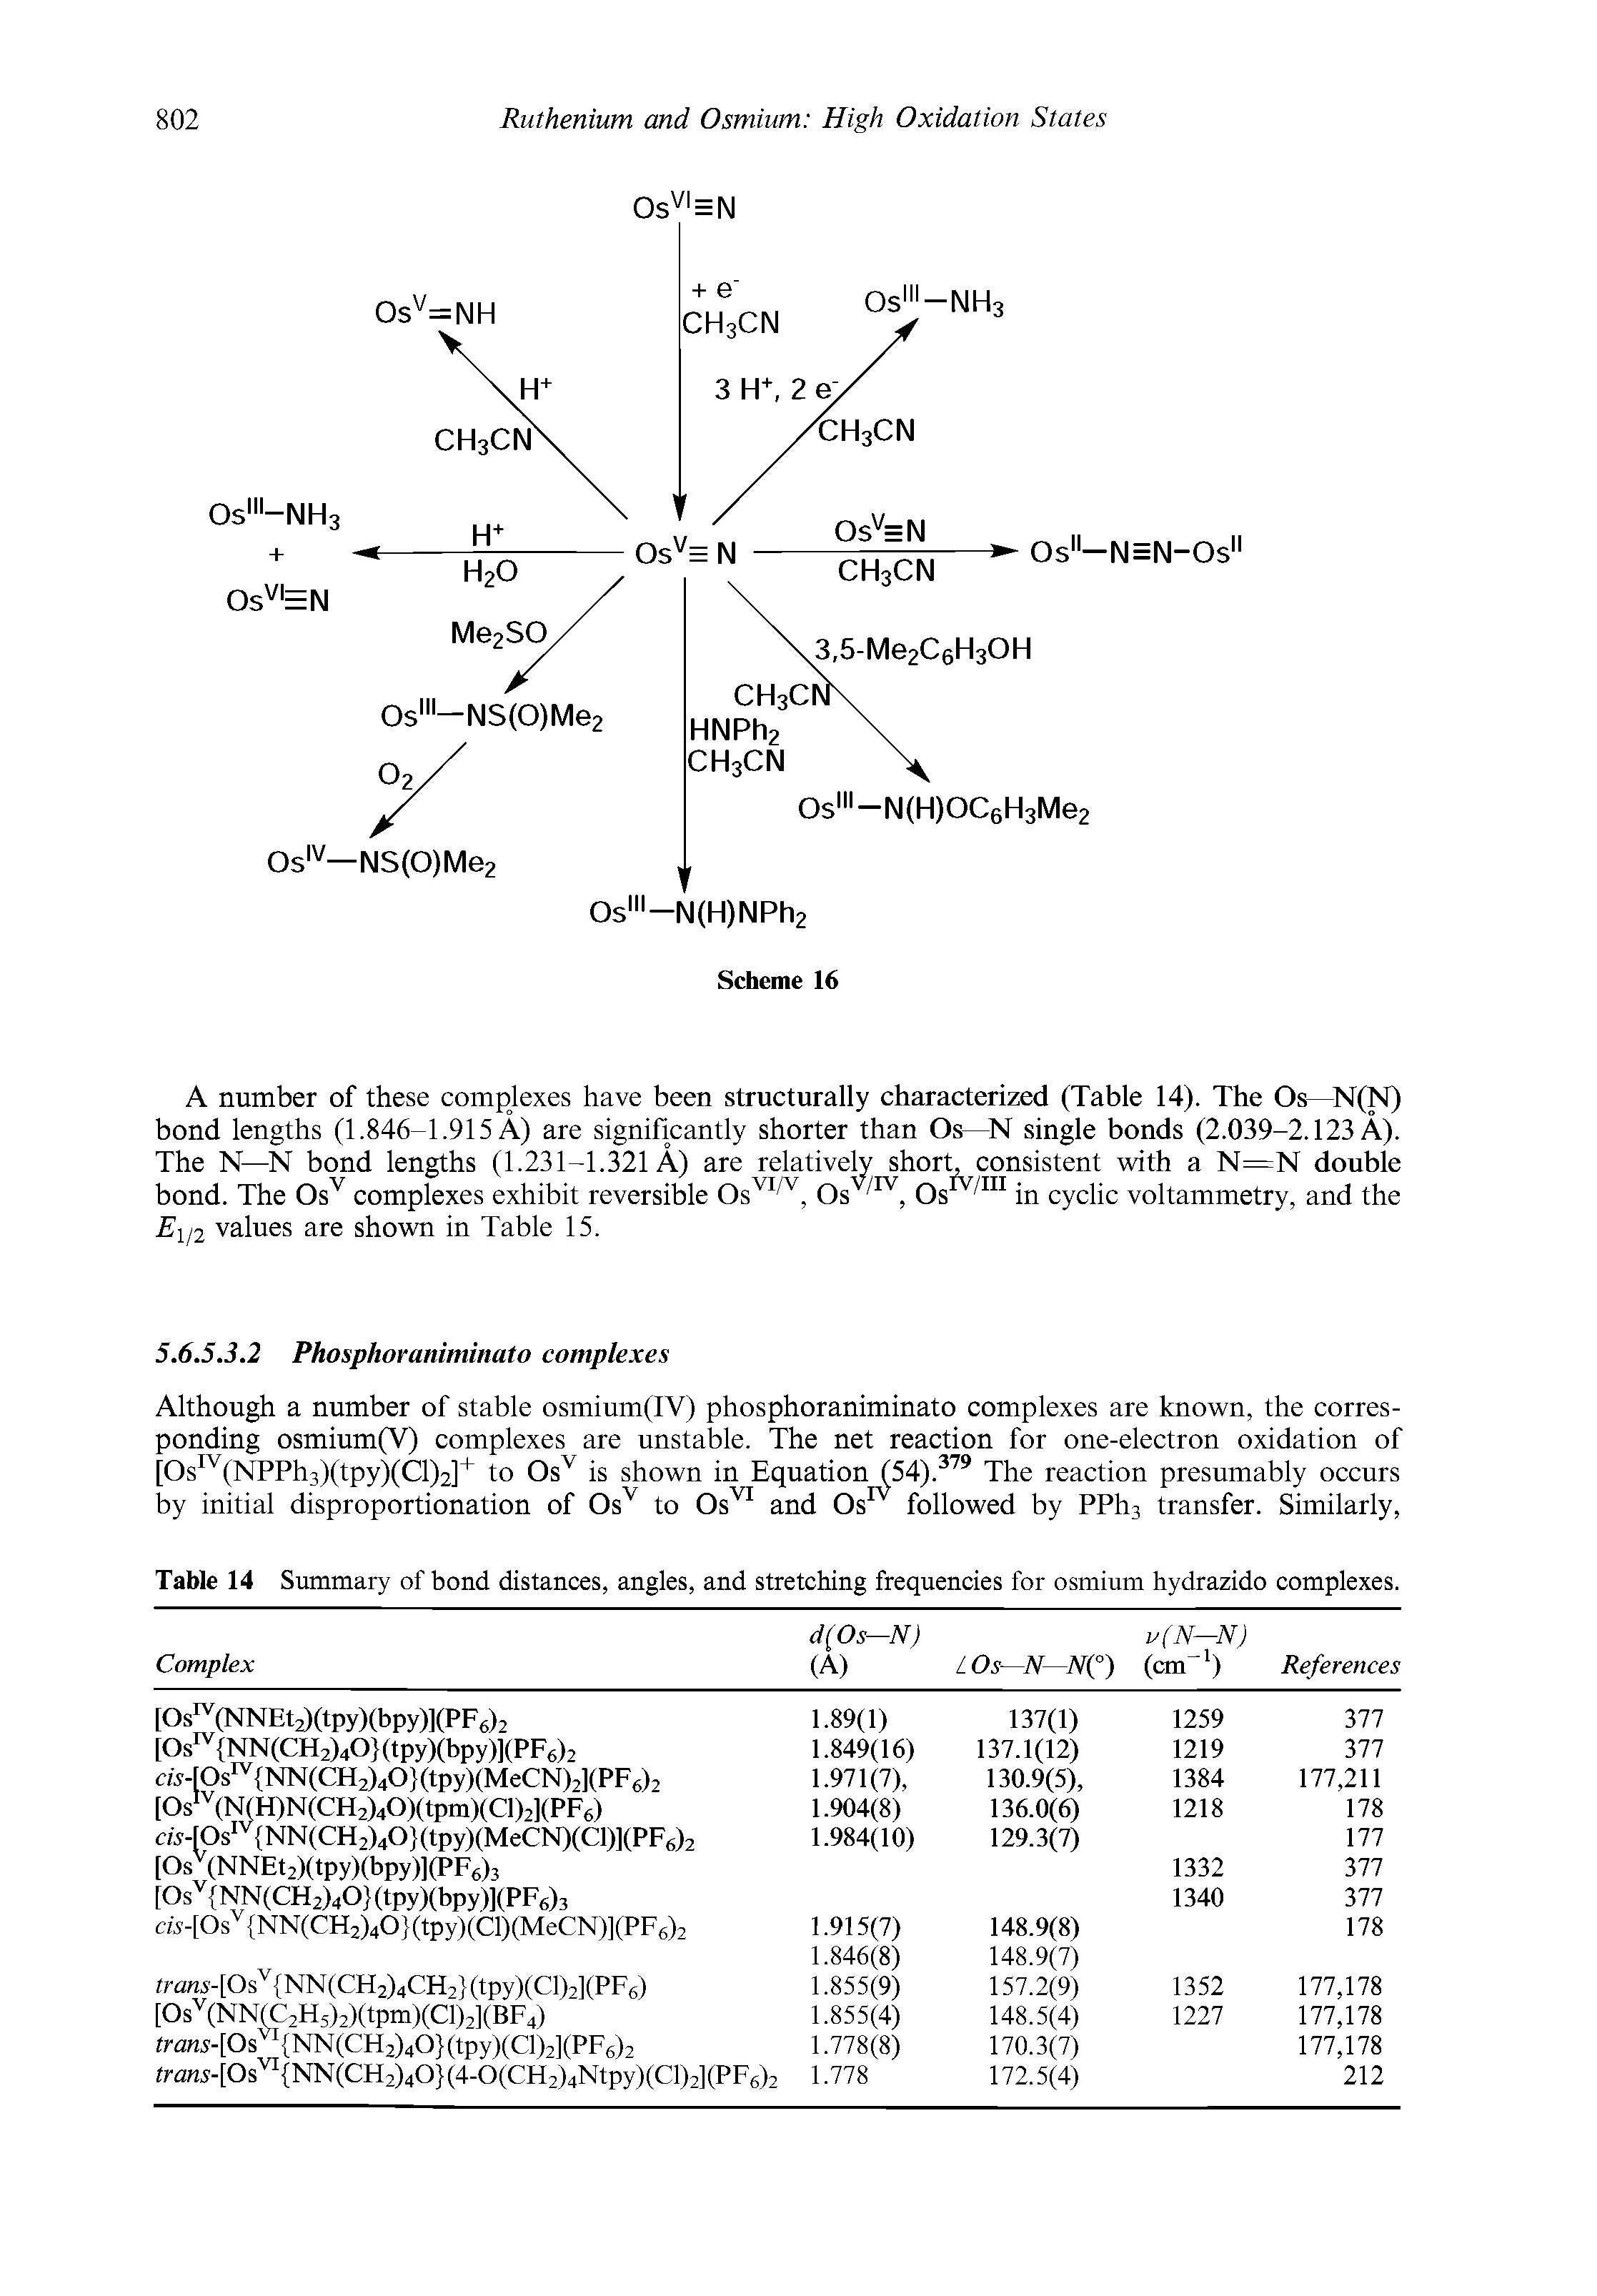 Table 14 Summary of bond distances, angles, and stretching frequencies for osmium hydrazido complexes.